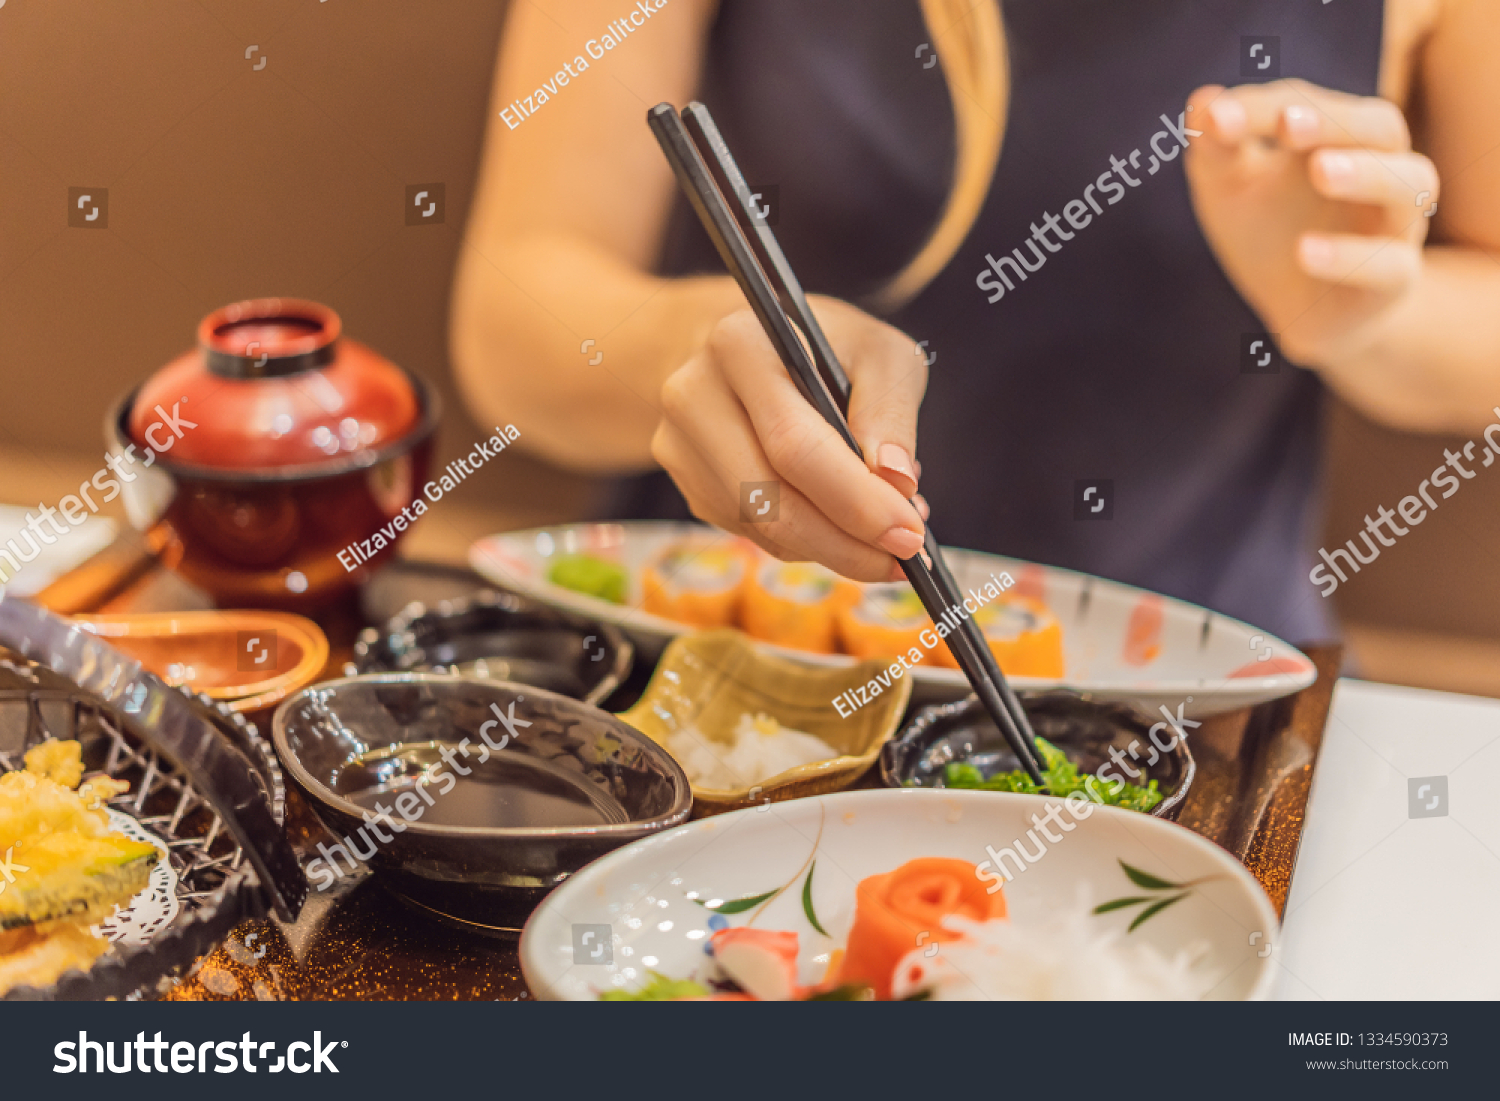 Woman eating japanese food in a japanese food restaurant #1334590373